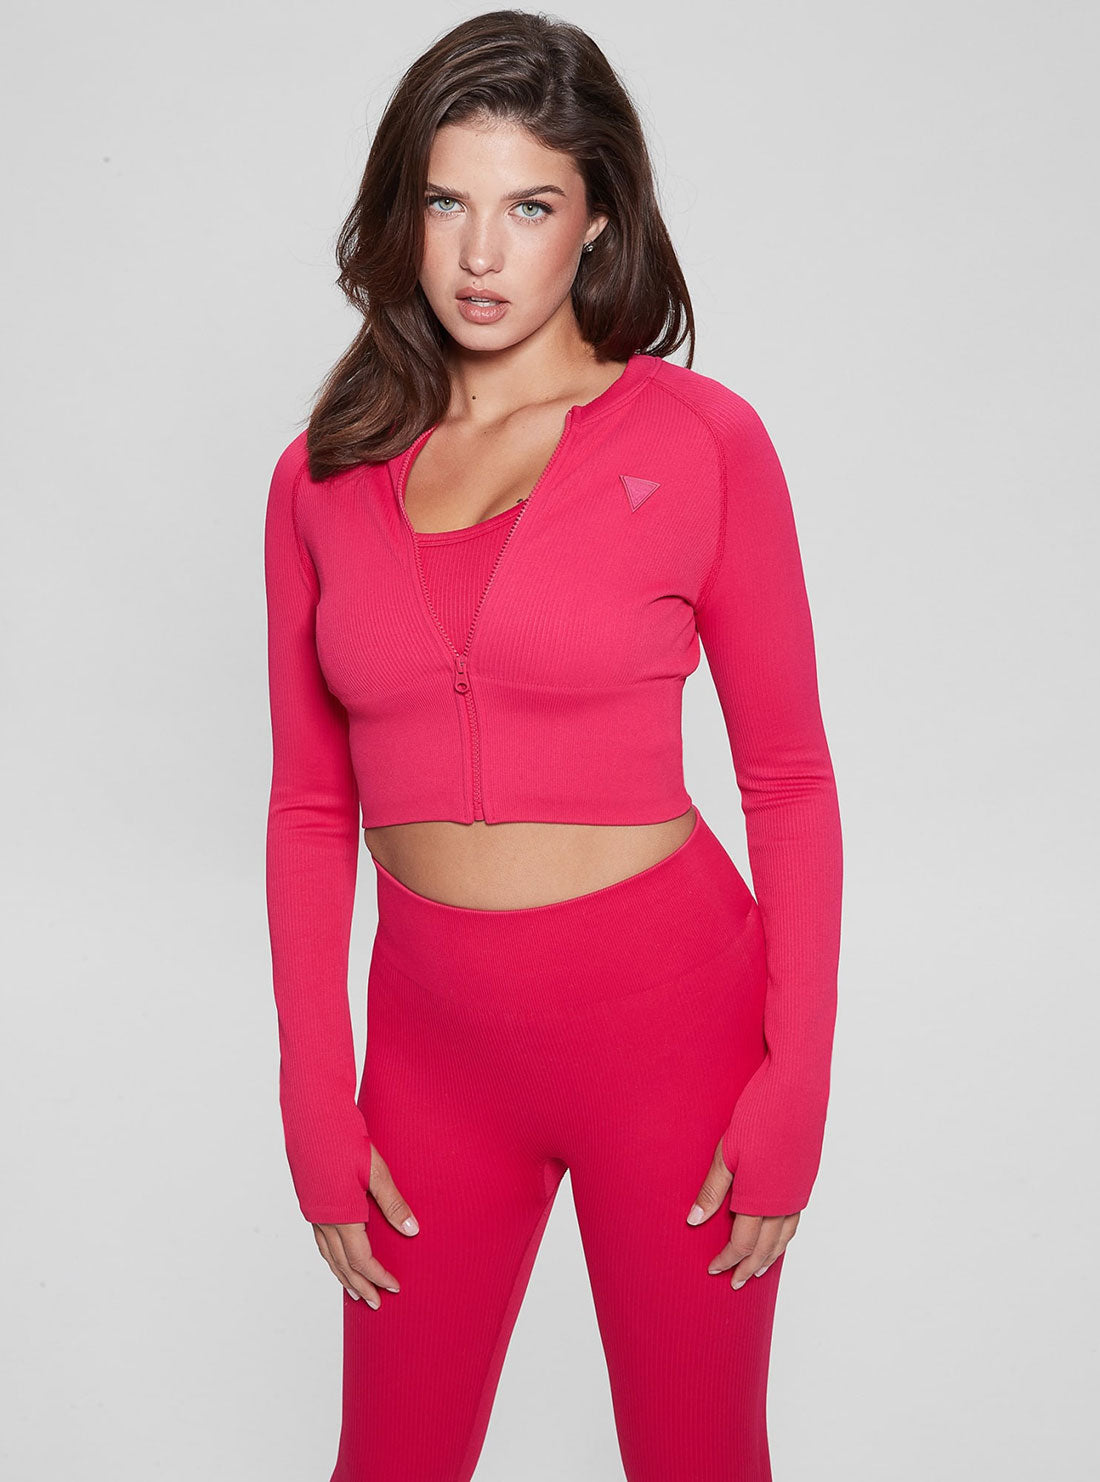 GUESS Women's Pink Rib Seamless Active Crop Top V2BP15ZZ04V Front View